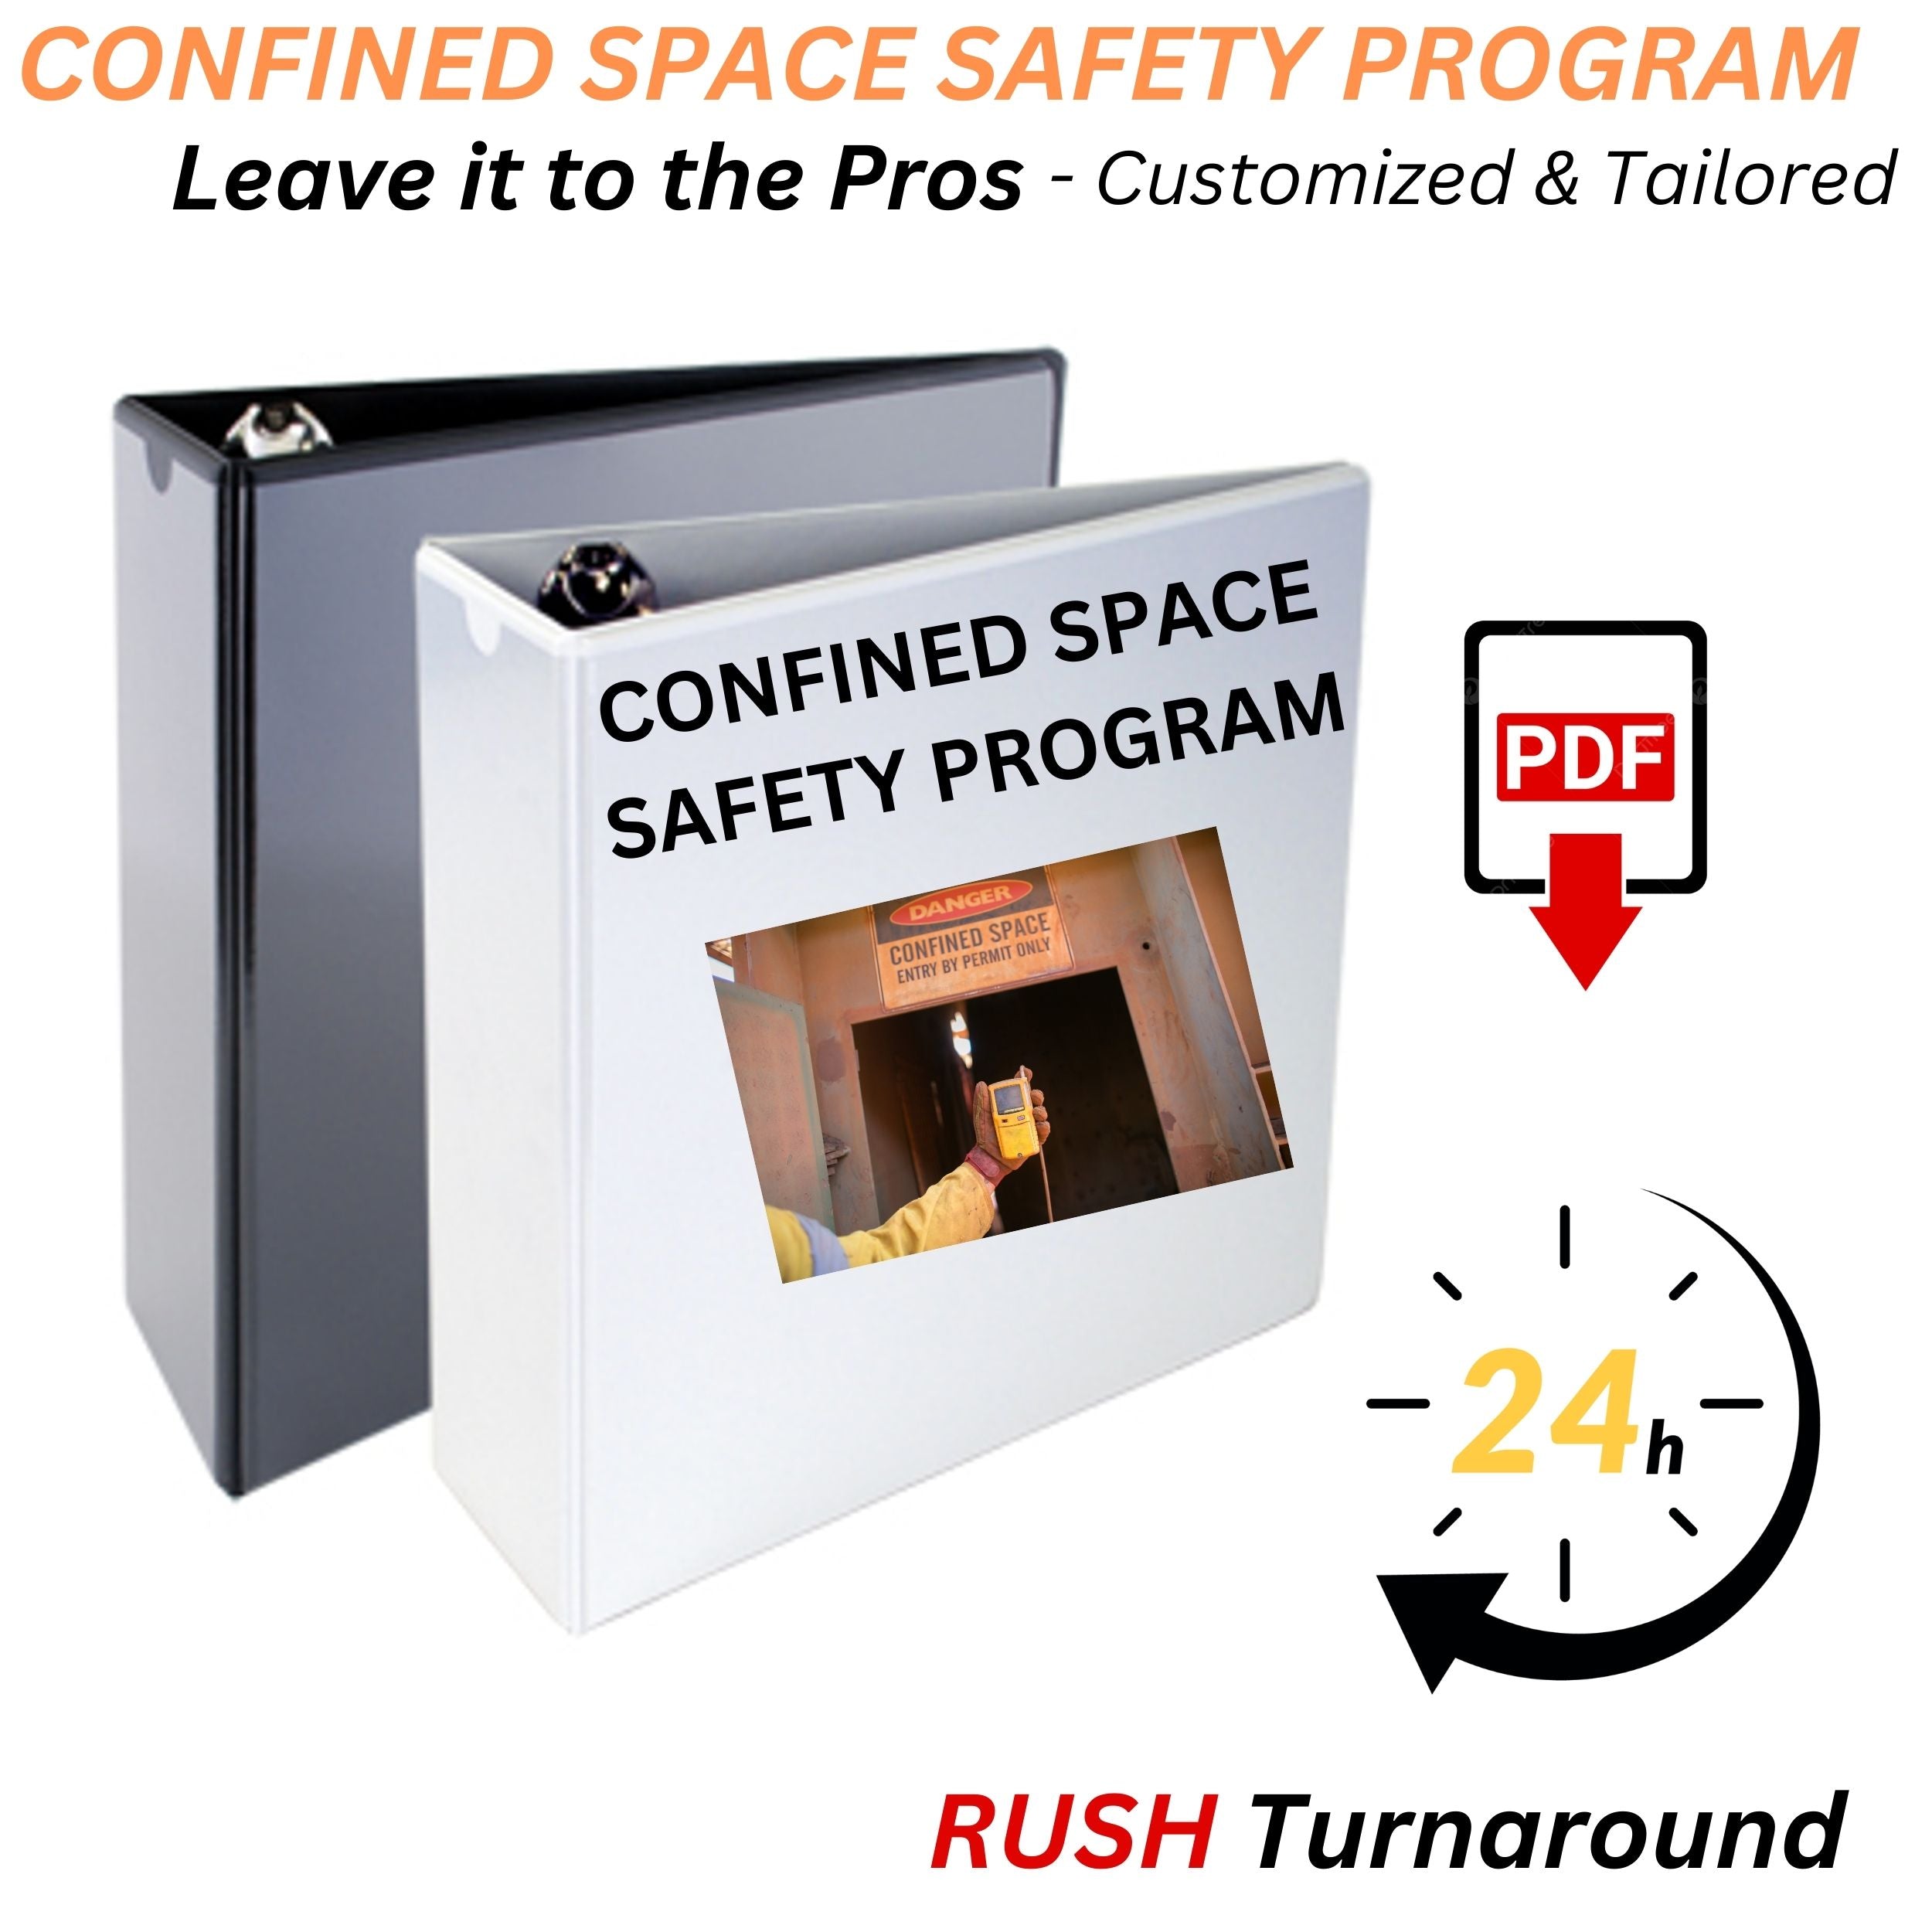 Confined Space Safety Program